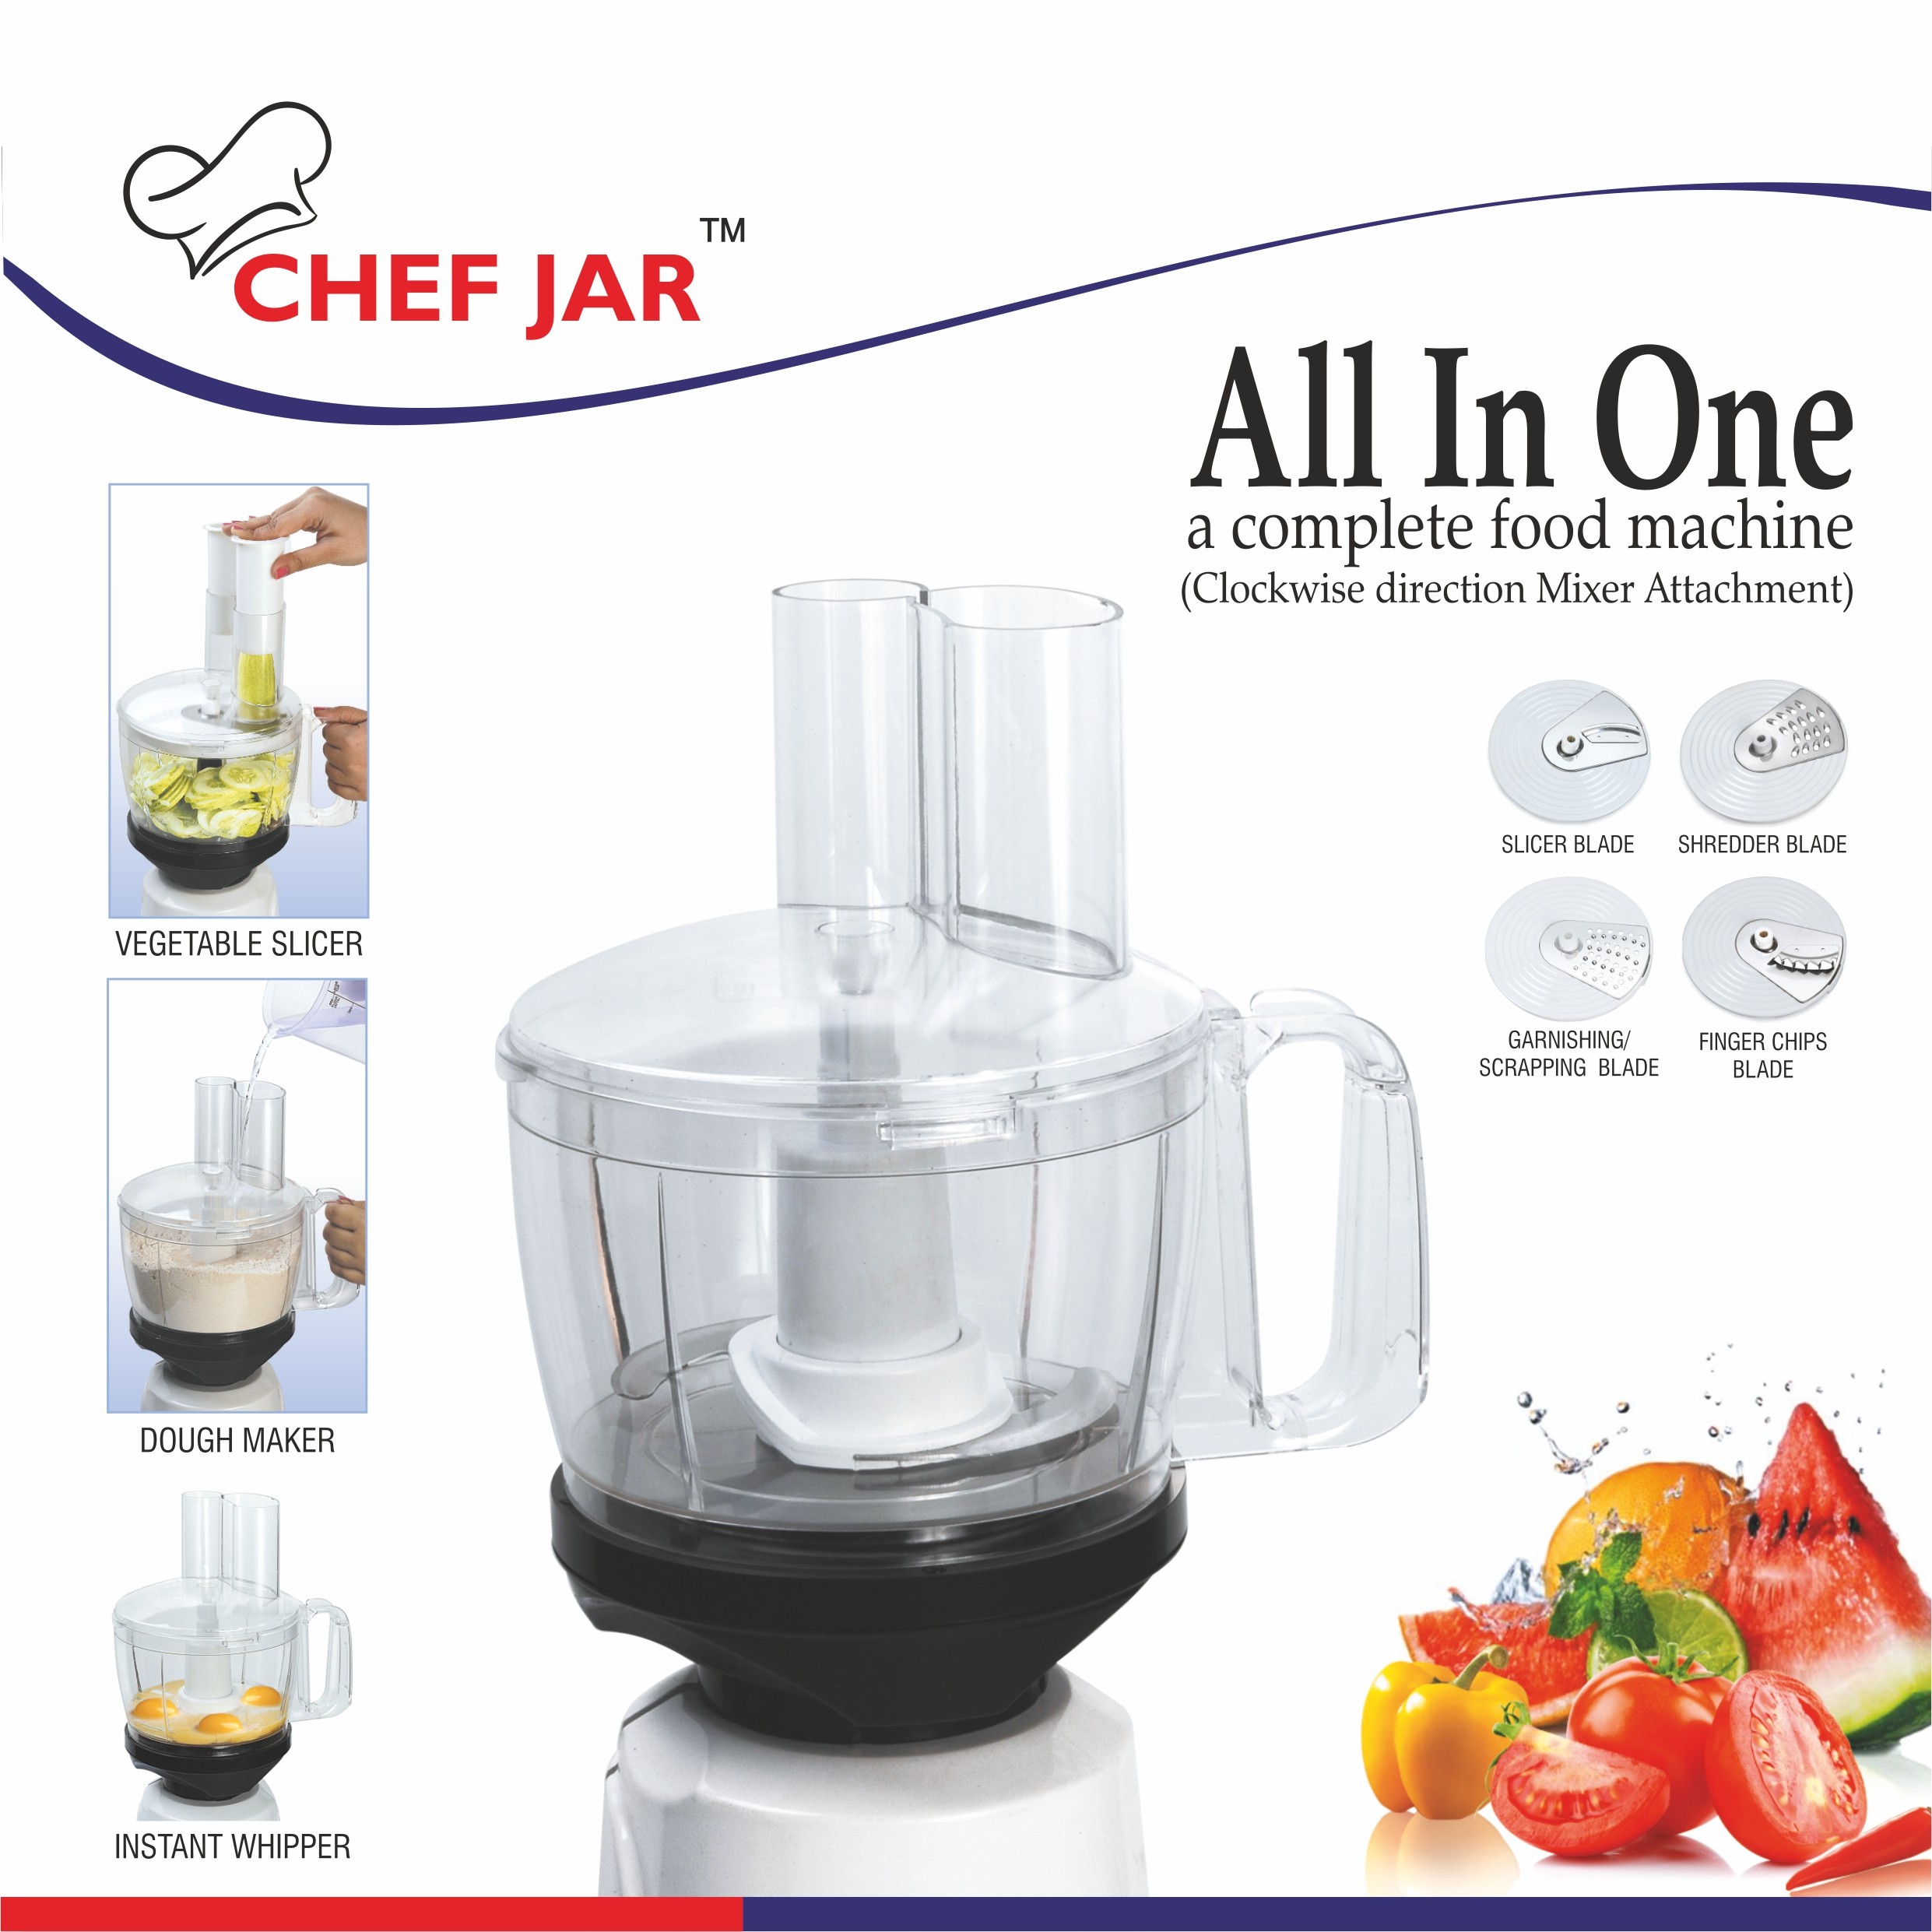 chef-jar-all-in-one-a-complete-food-processor-attachment-for-most-indian-mixer-grinders4